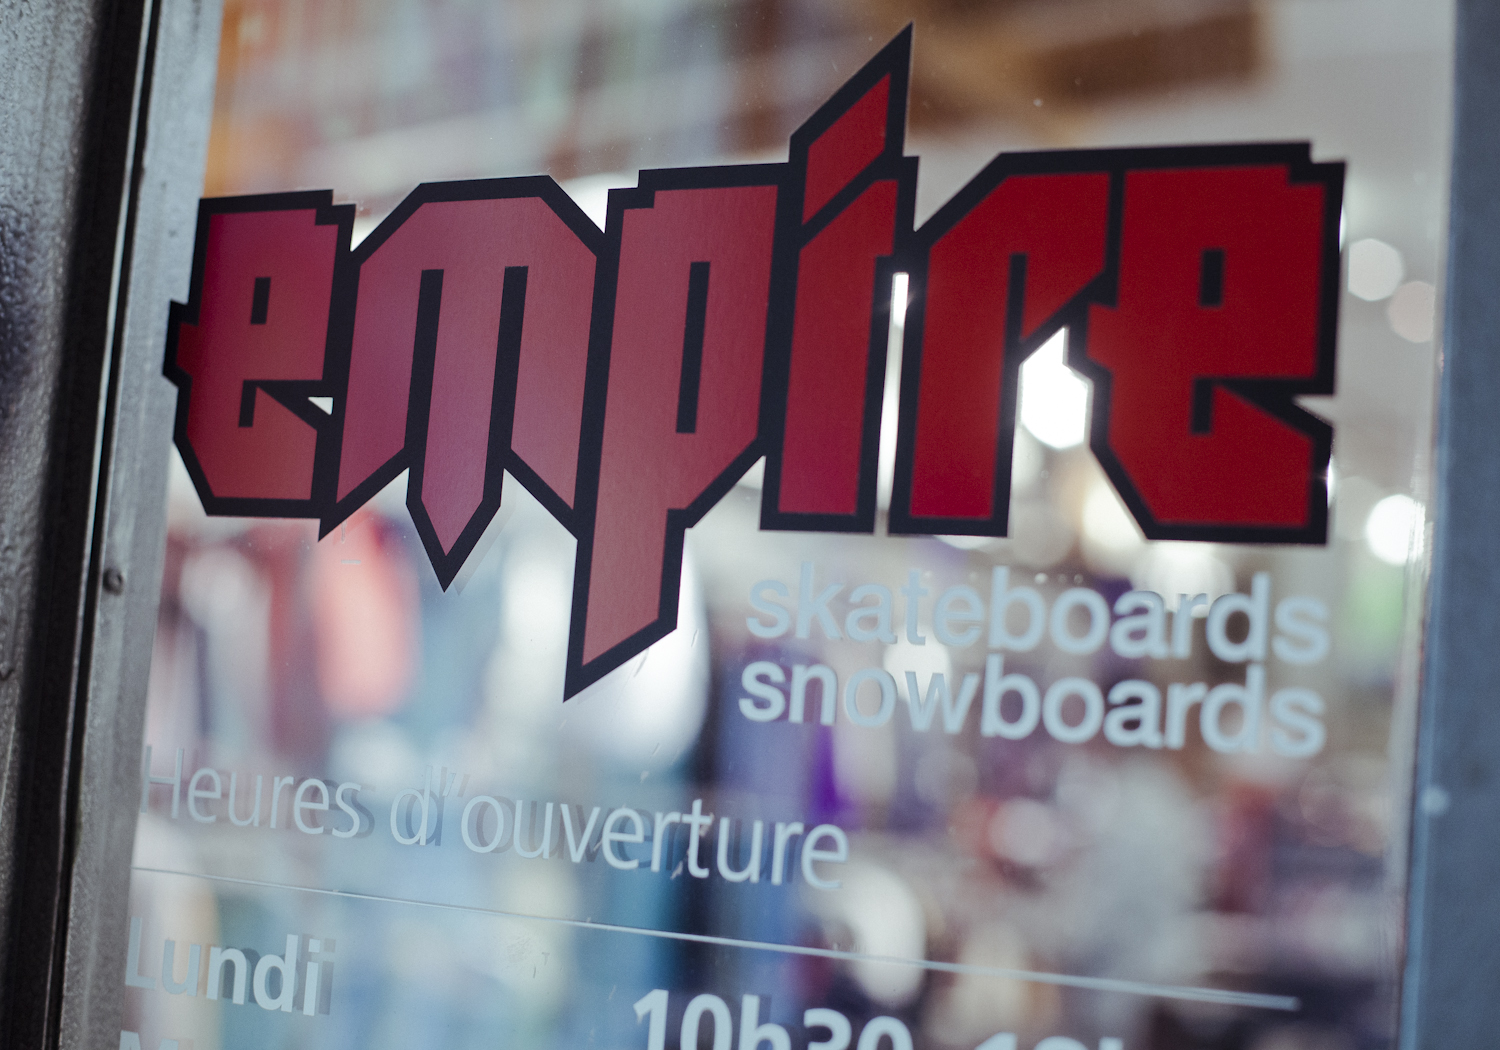 The new Empire store in Montréal is really sick! We checked in out in advance of this weekend's opening